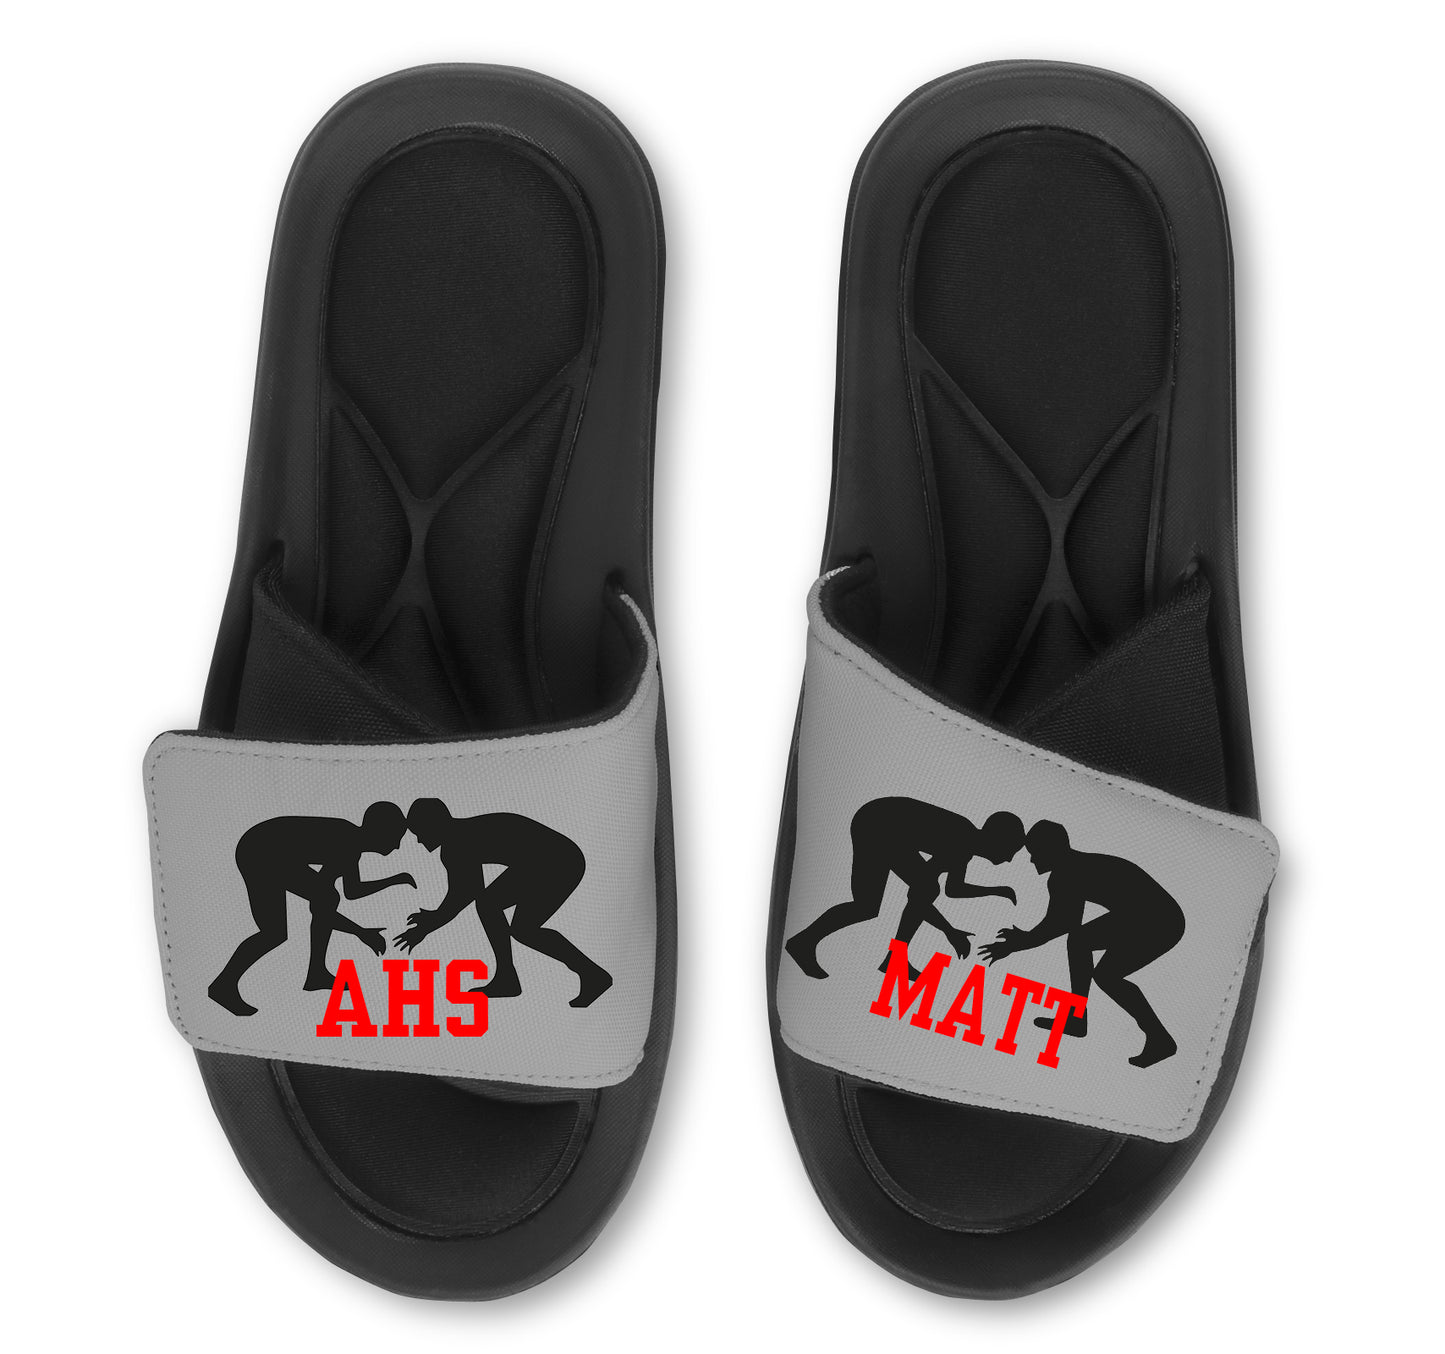 Personalized Wrestling Slides Sandals Customized With Your Choices